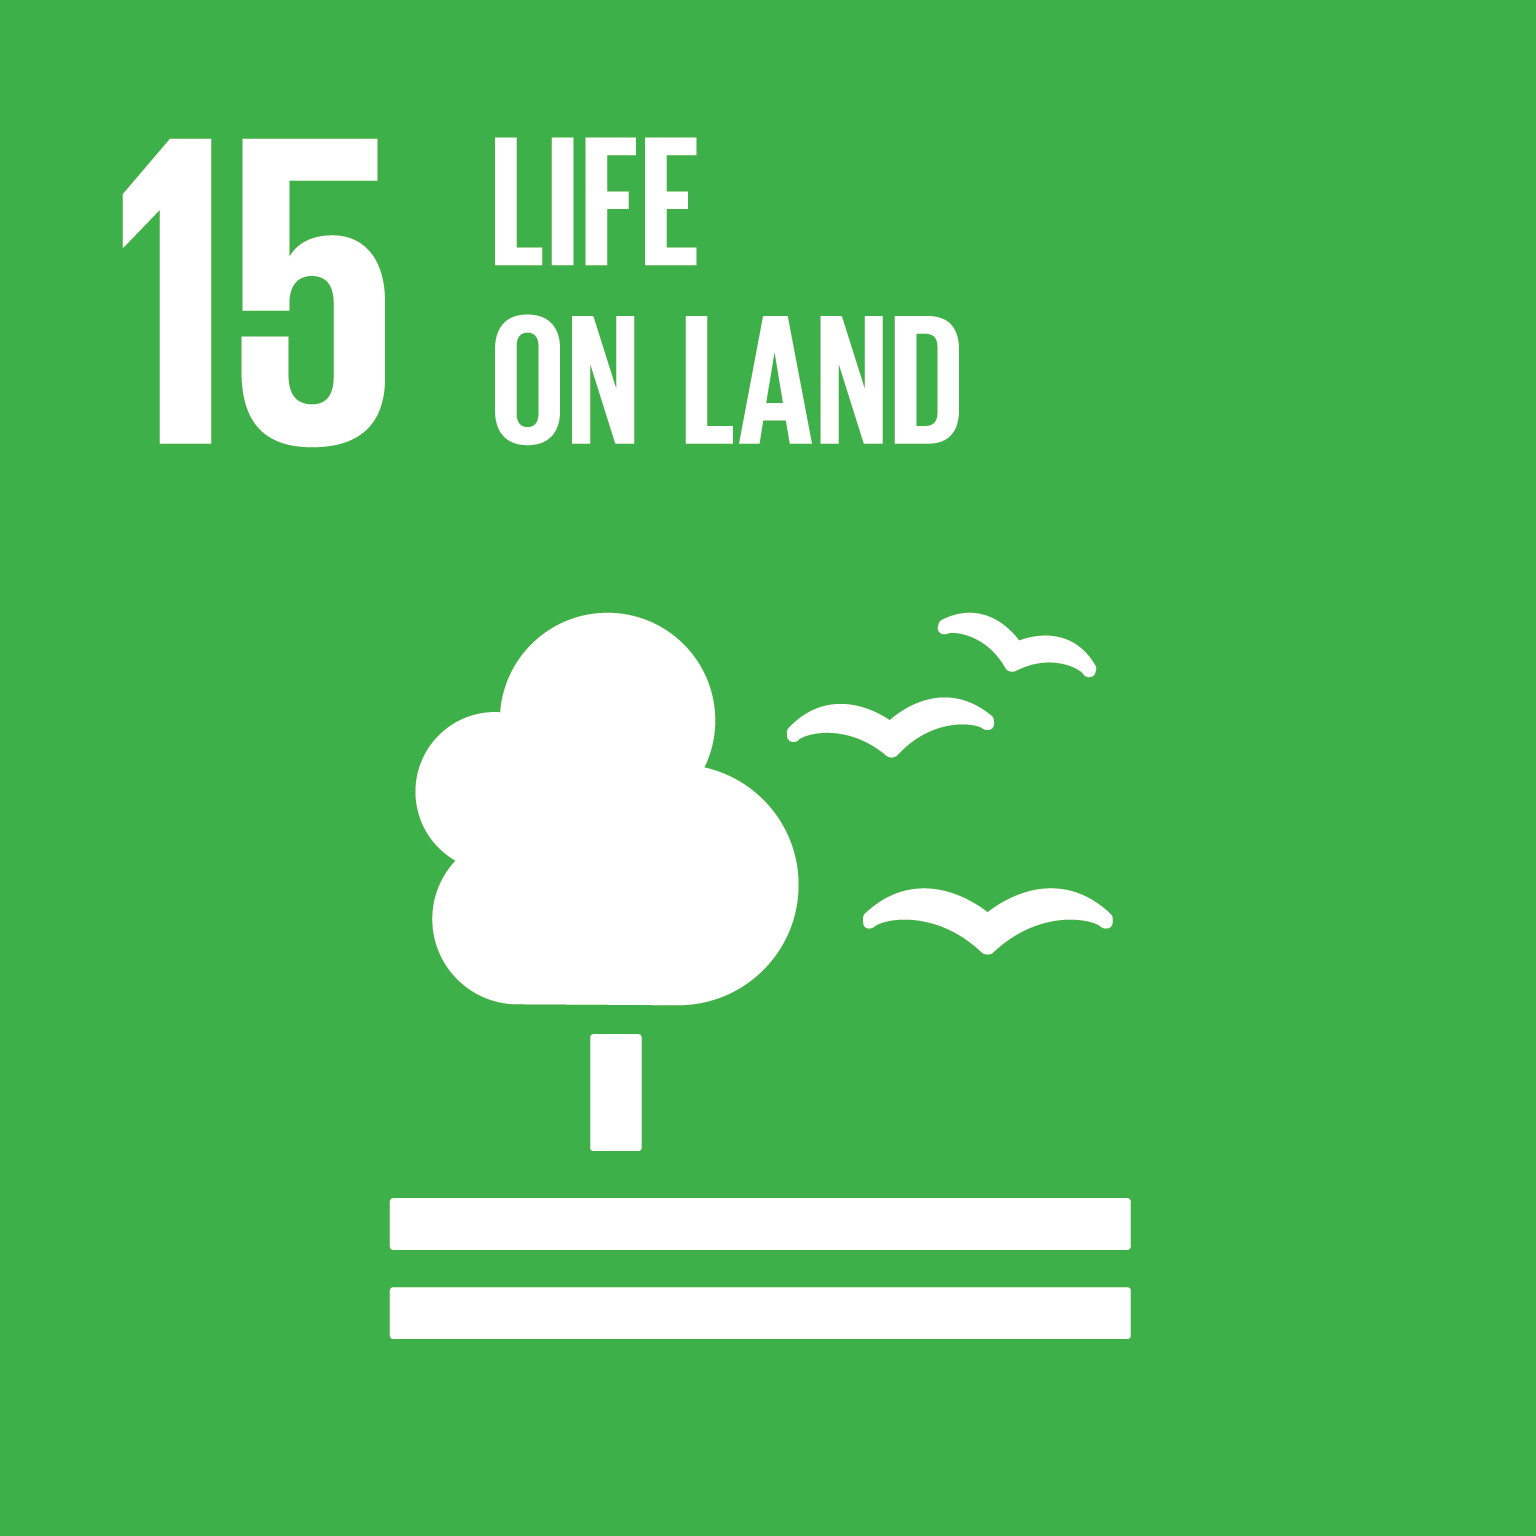 Goal 15: Life on Land - Protect, restore and promote sustainable use of terrestrial ecosystems, sustainably manage forests, combat desertification, and halt and reverse land degradation and halt biodiversity loss